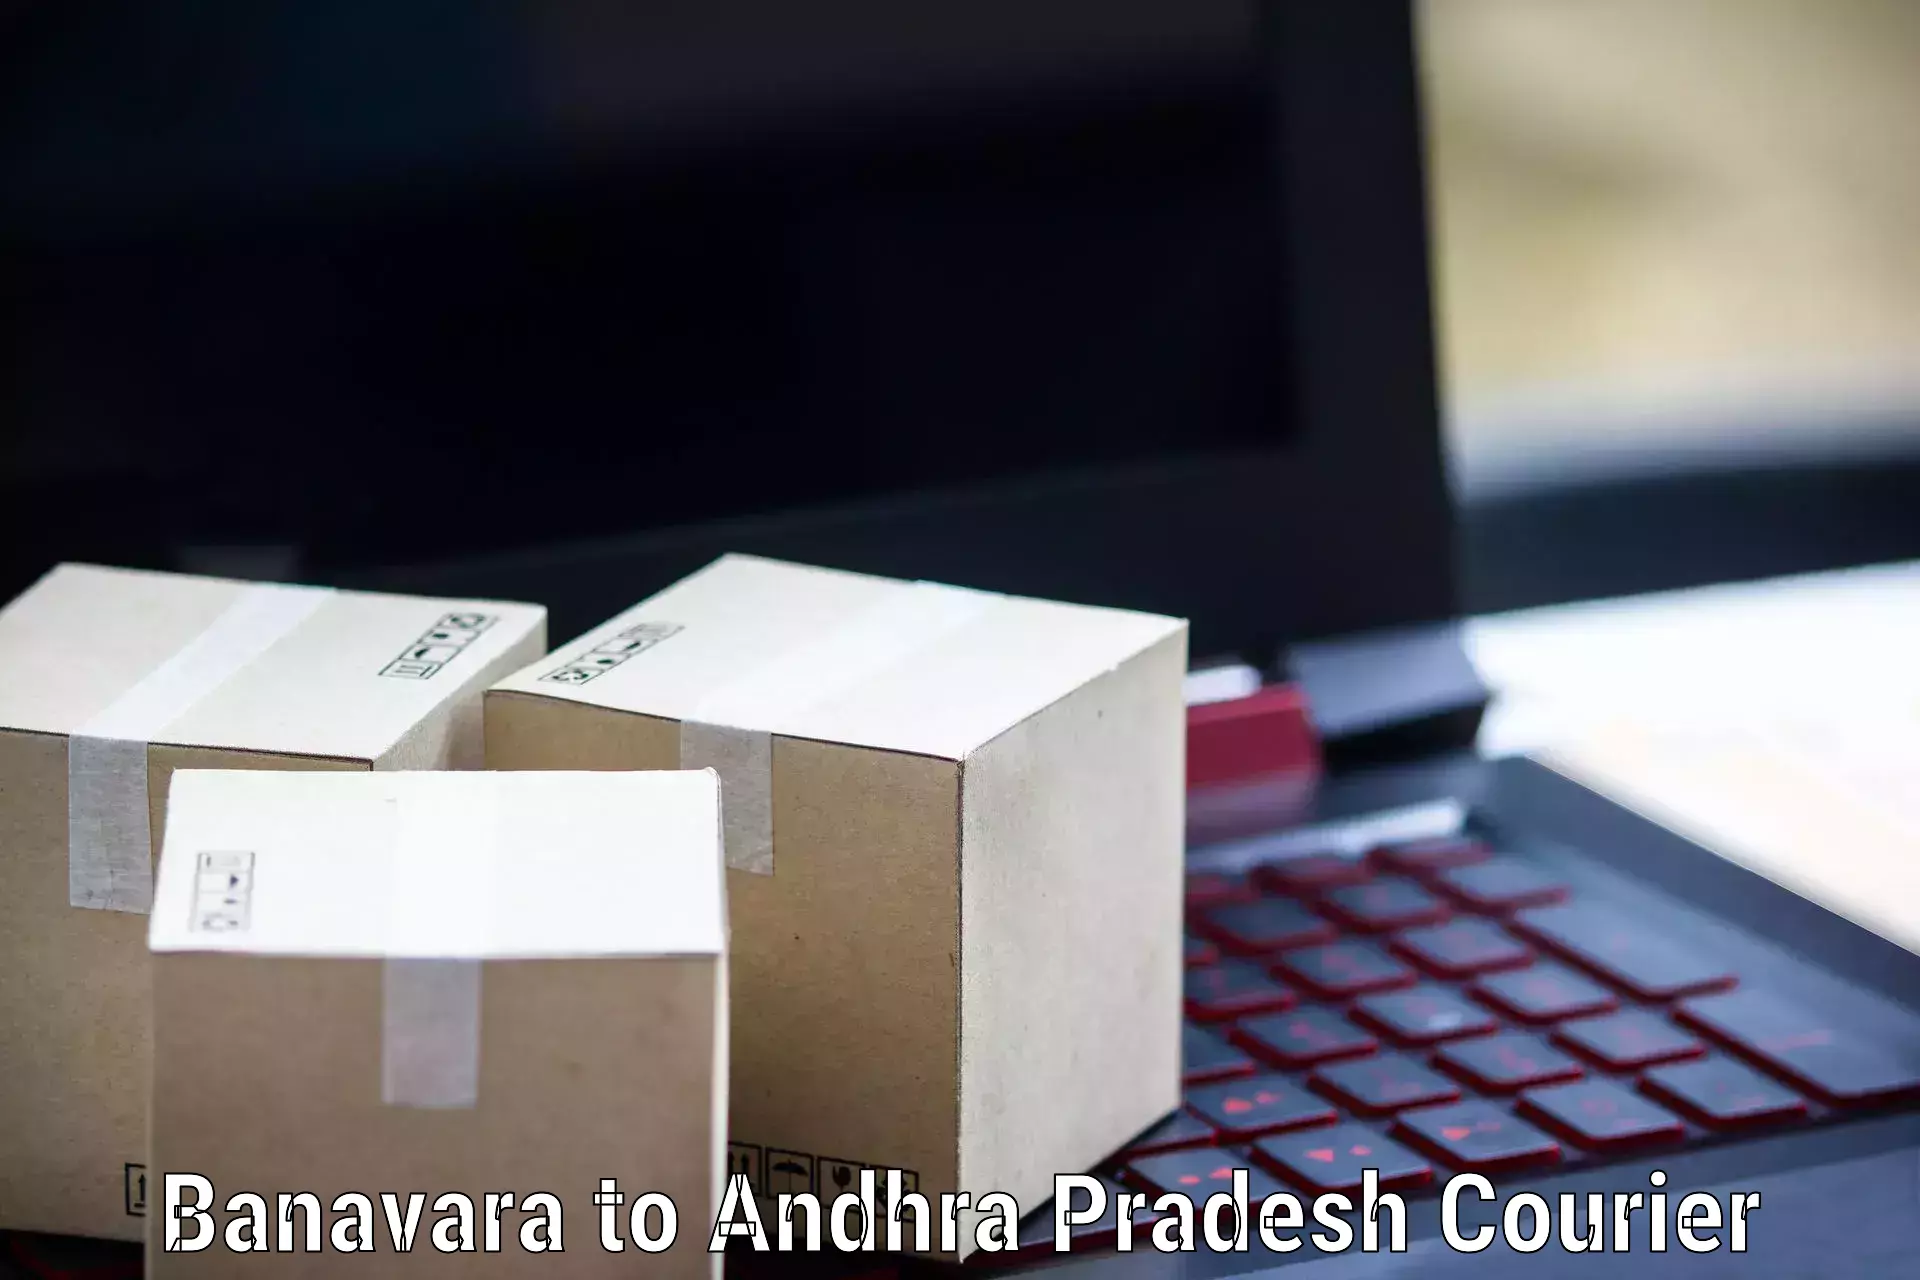 Reliable courier service Banavara to Visakhapatnam